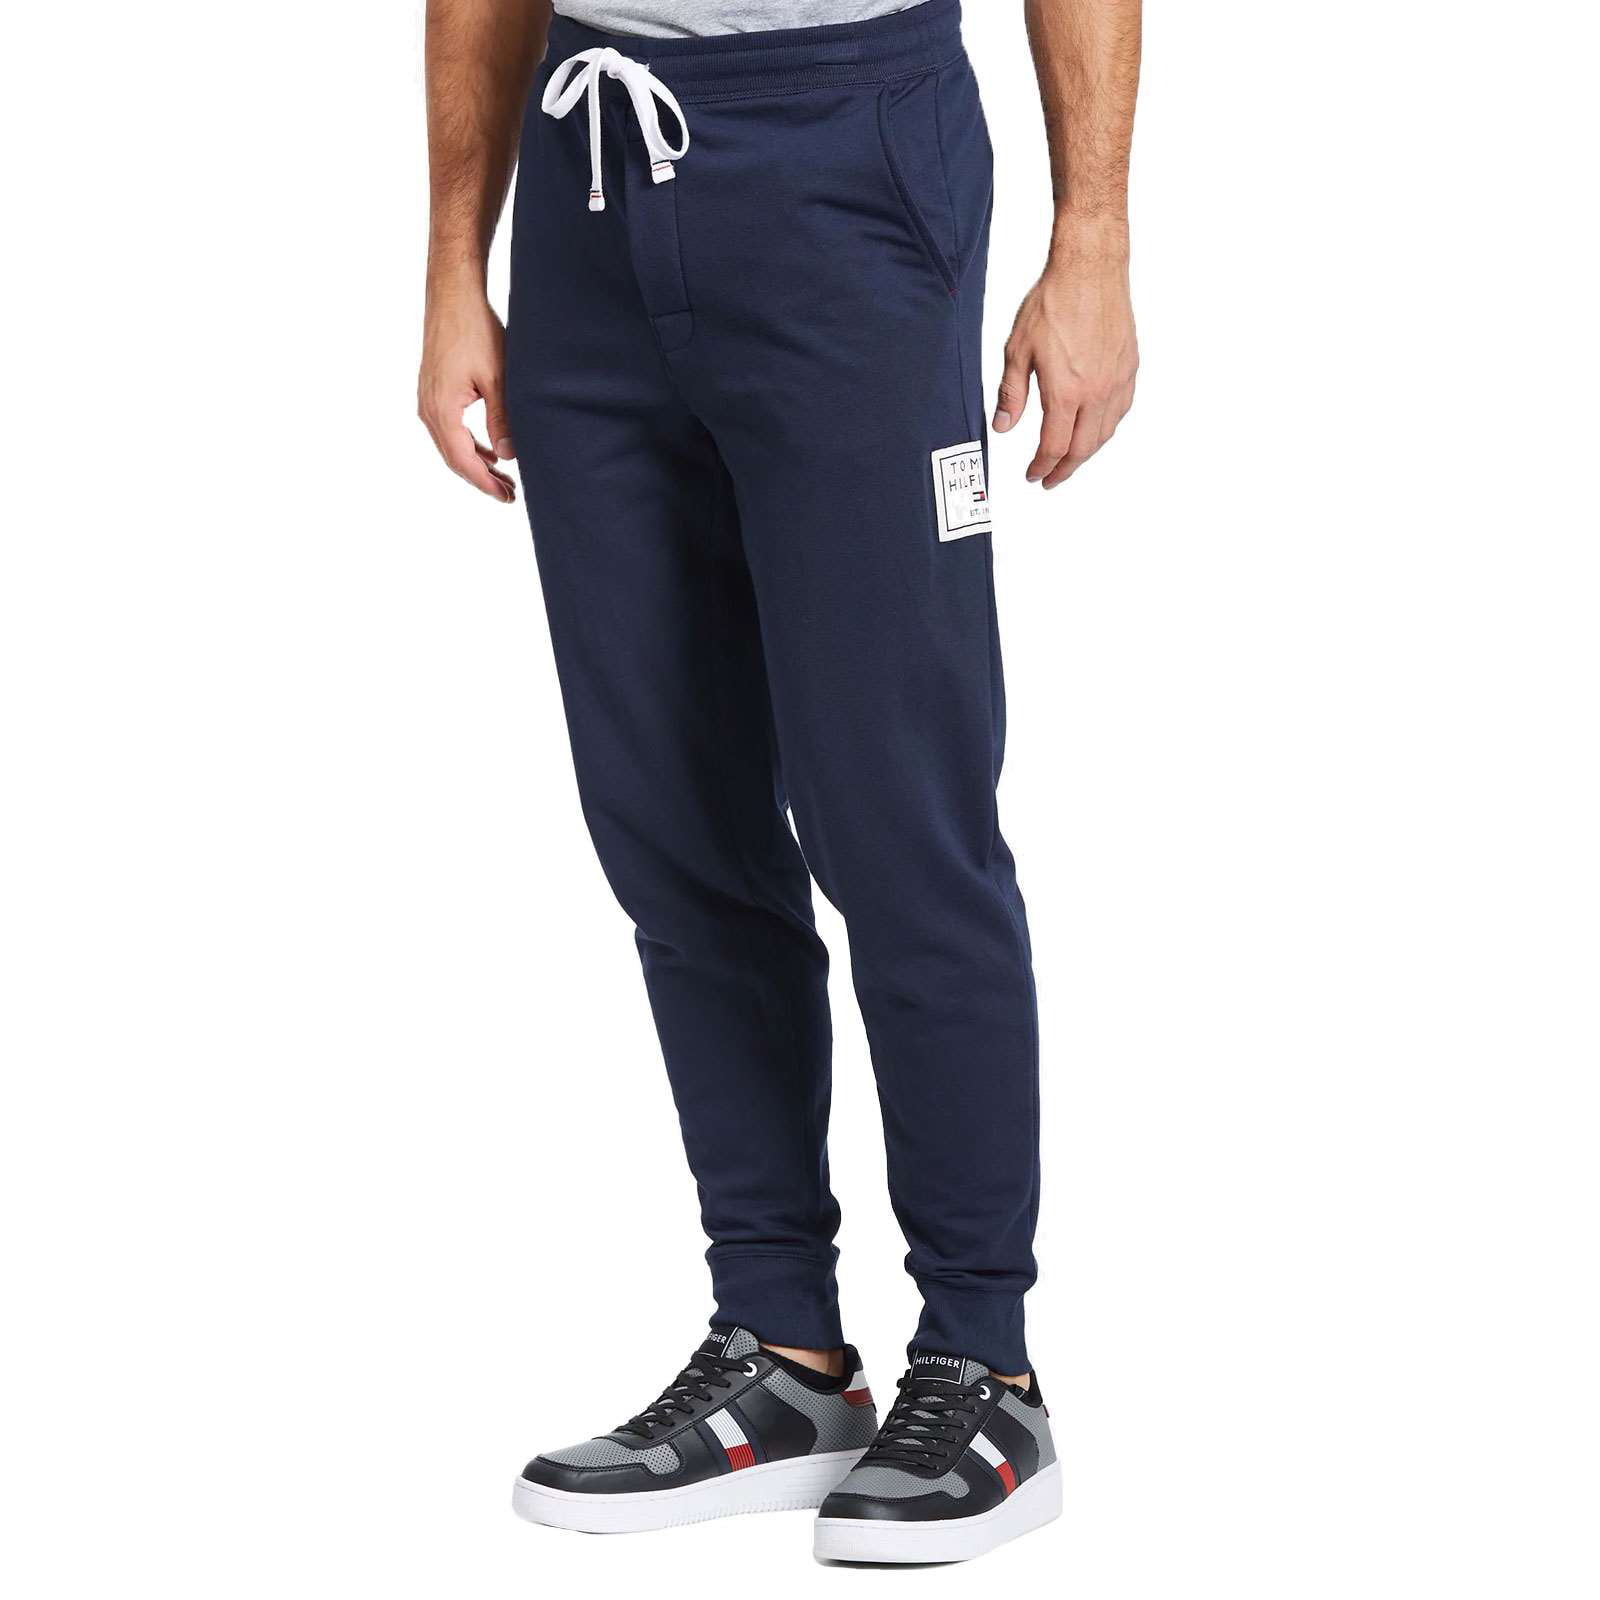 Tommy Hilfiger Mens Modern Essentials Relaxed Fit Sweatpants